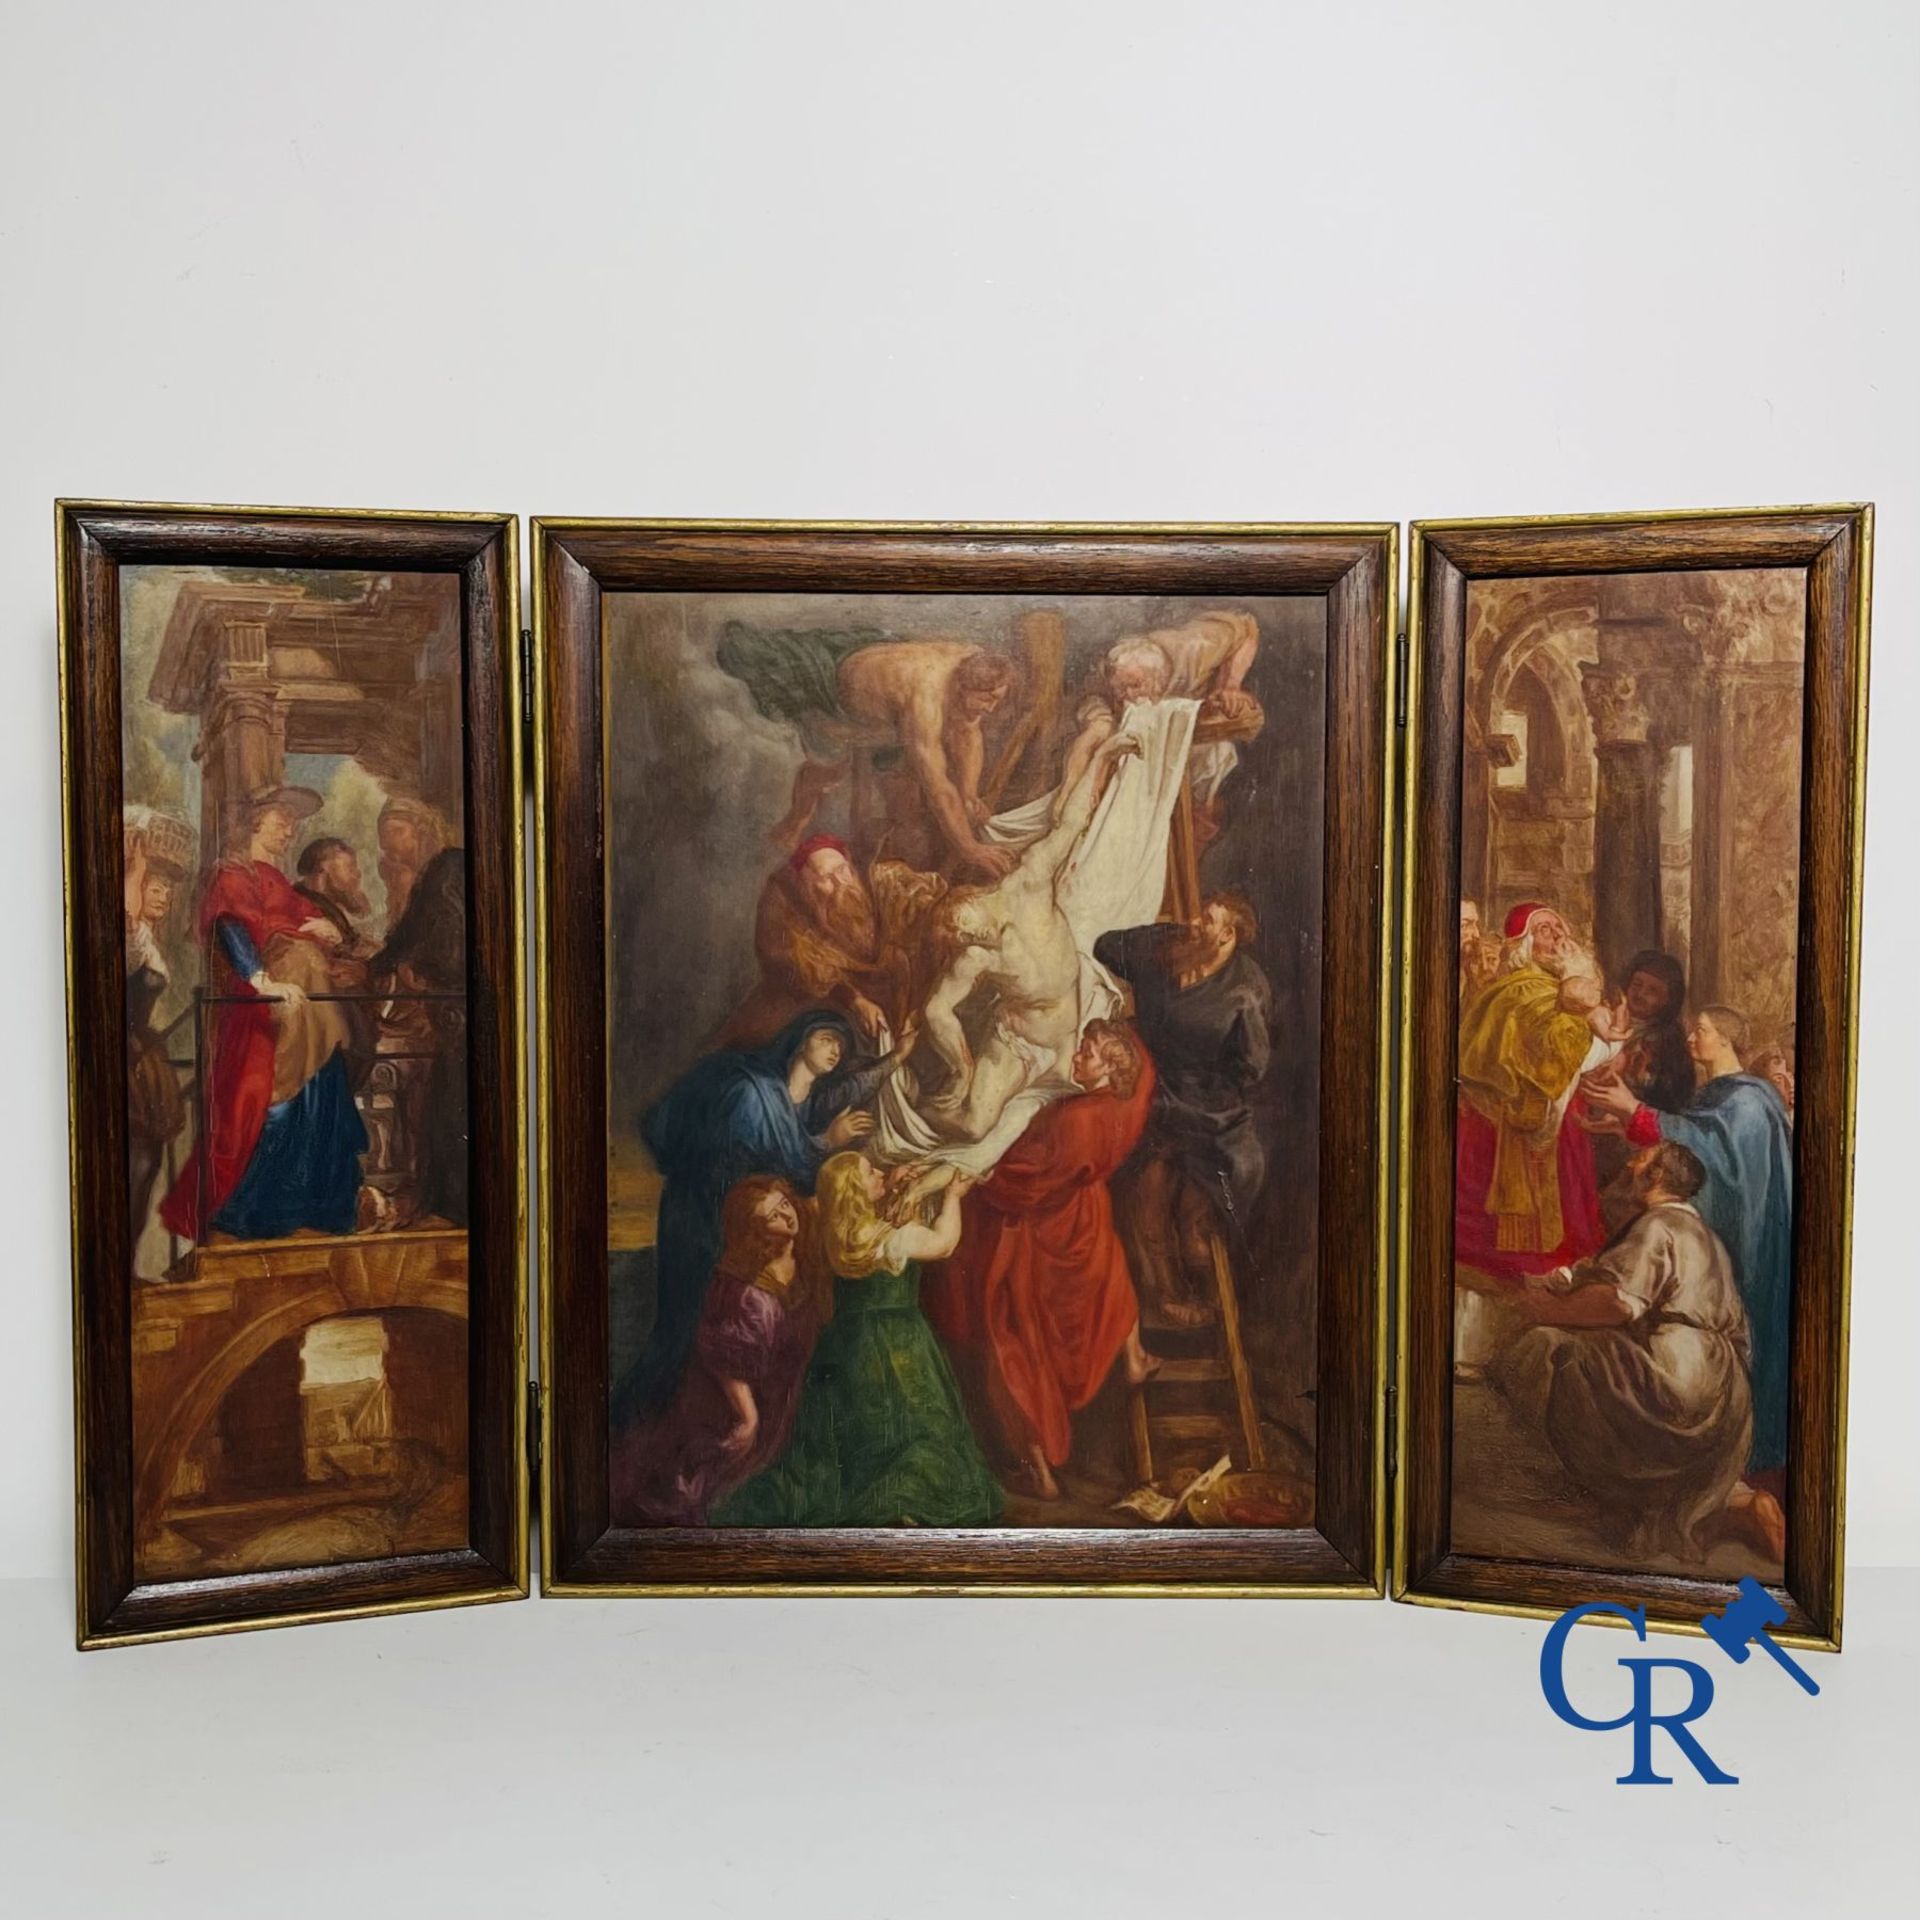 Triptych: After Pieter Paul Rubens, 19th century sketch of the 3 inner panels of the Descent from th